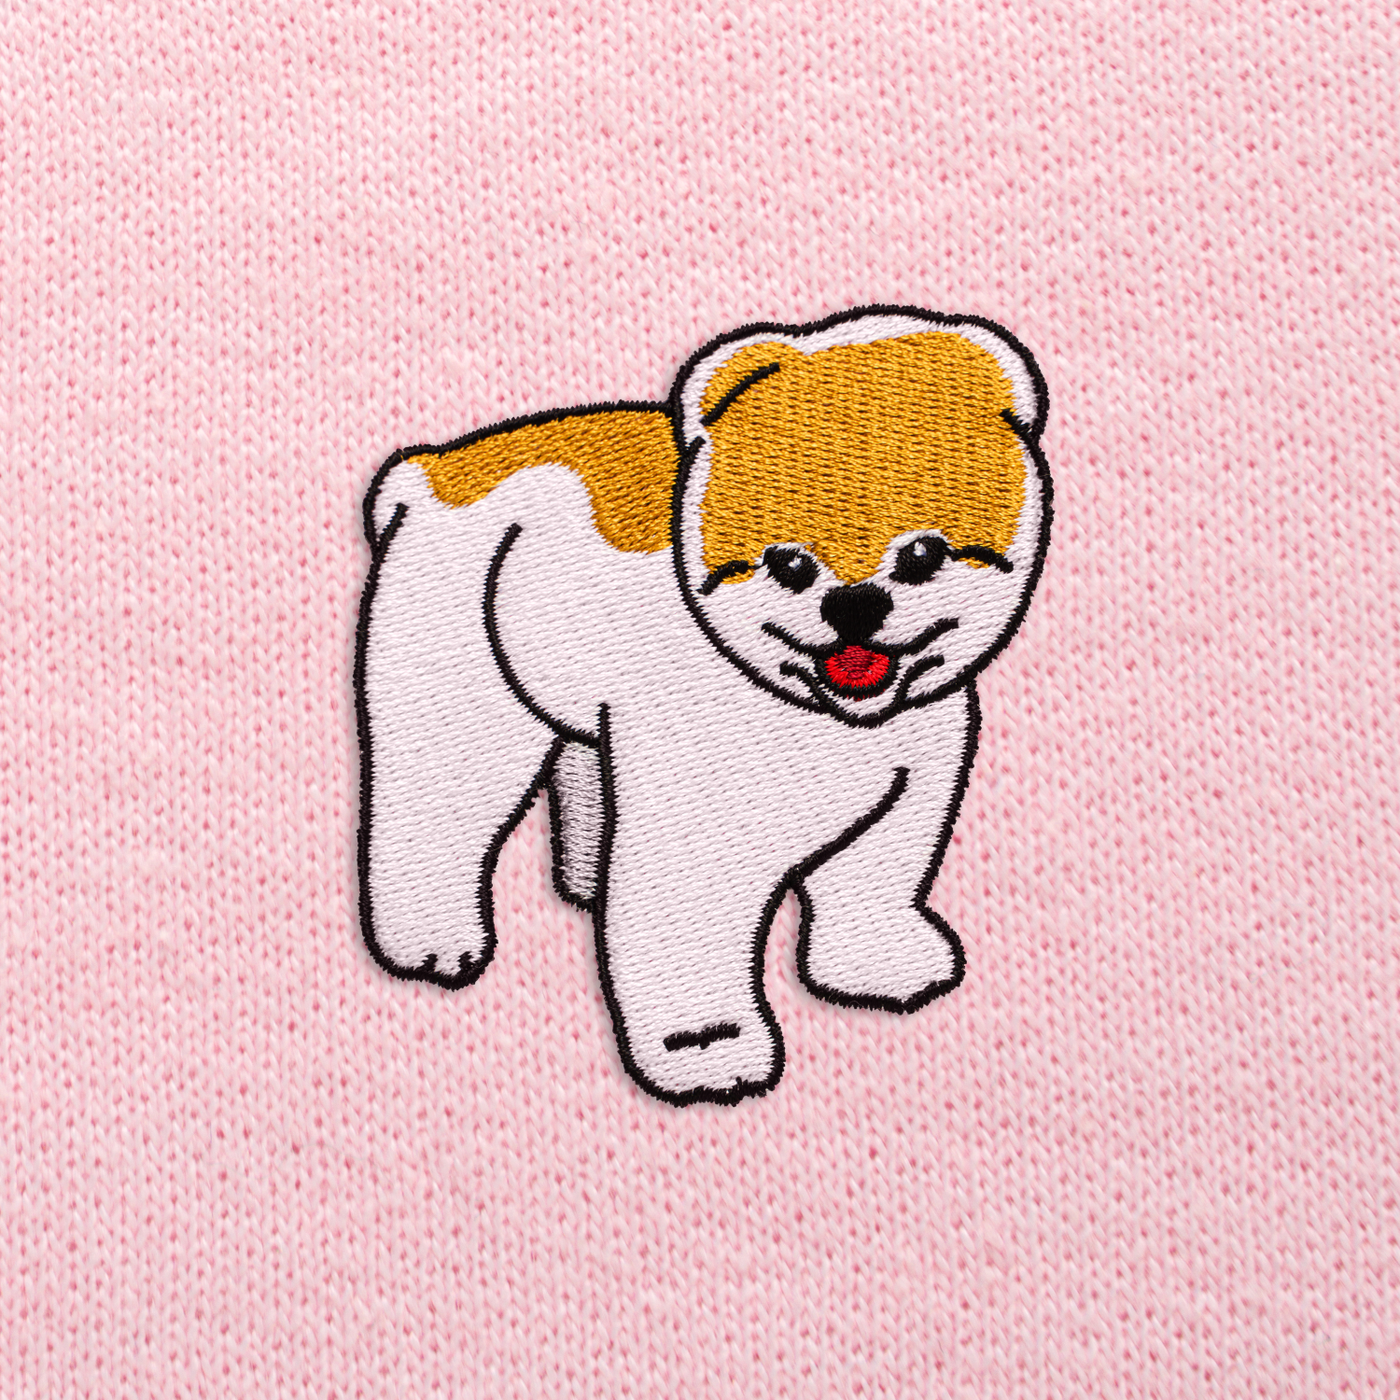 Bobby's Planet Women's Embroidered Pomeranian Sweatshirt from Paws Dog Cat Animals Collection in Light Pink Color#color_light-pink